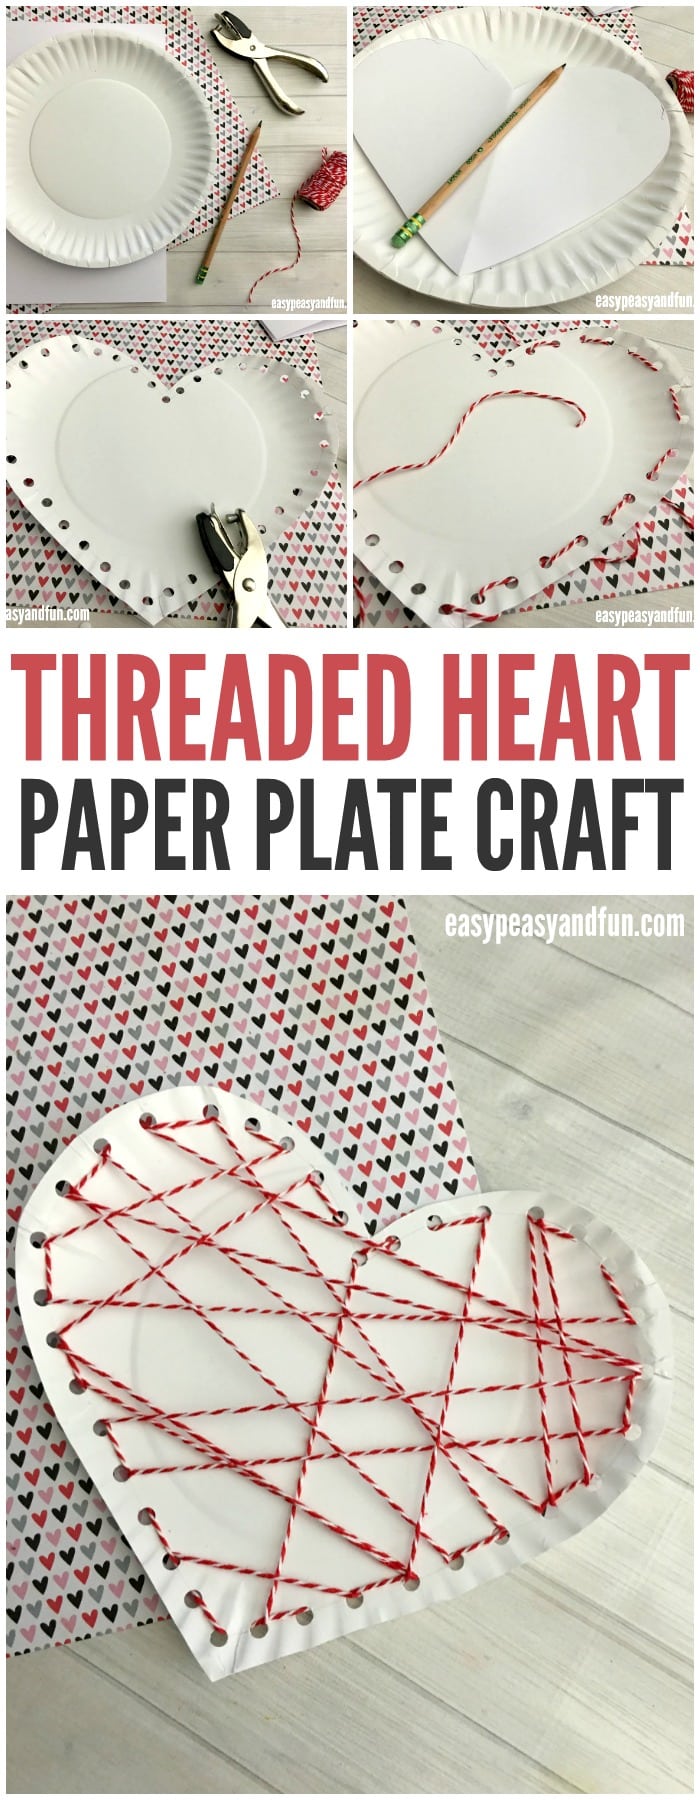 Heart Paper Plate Craft for Little Ones